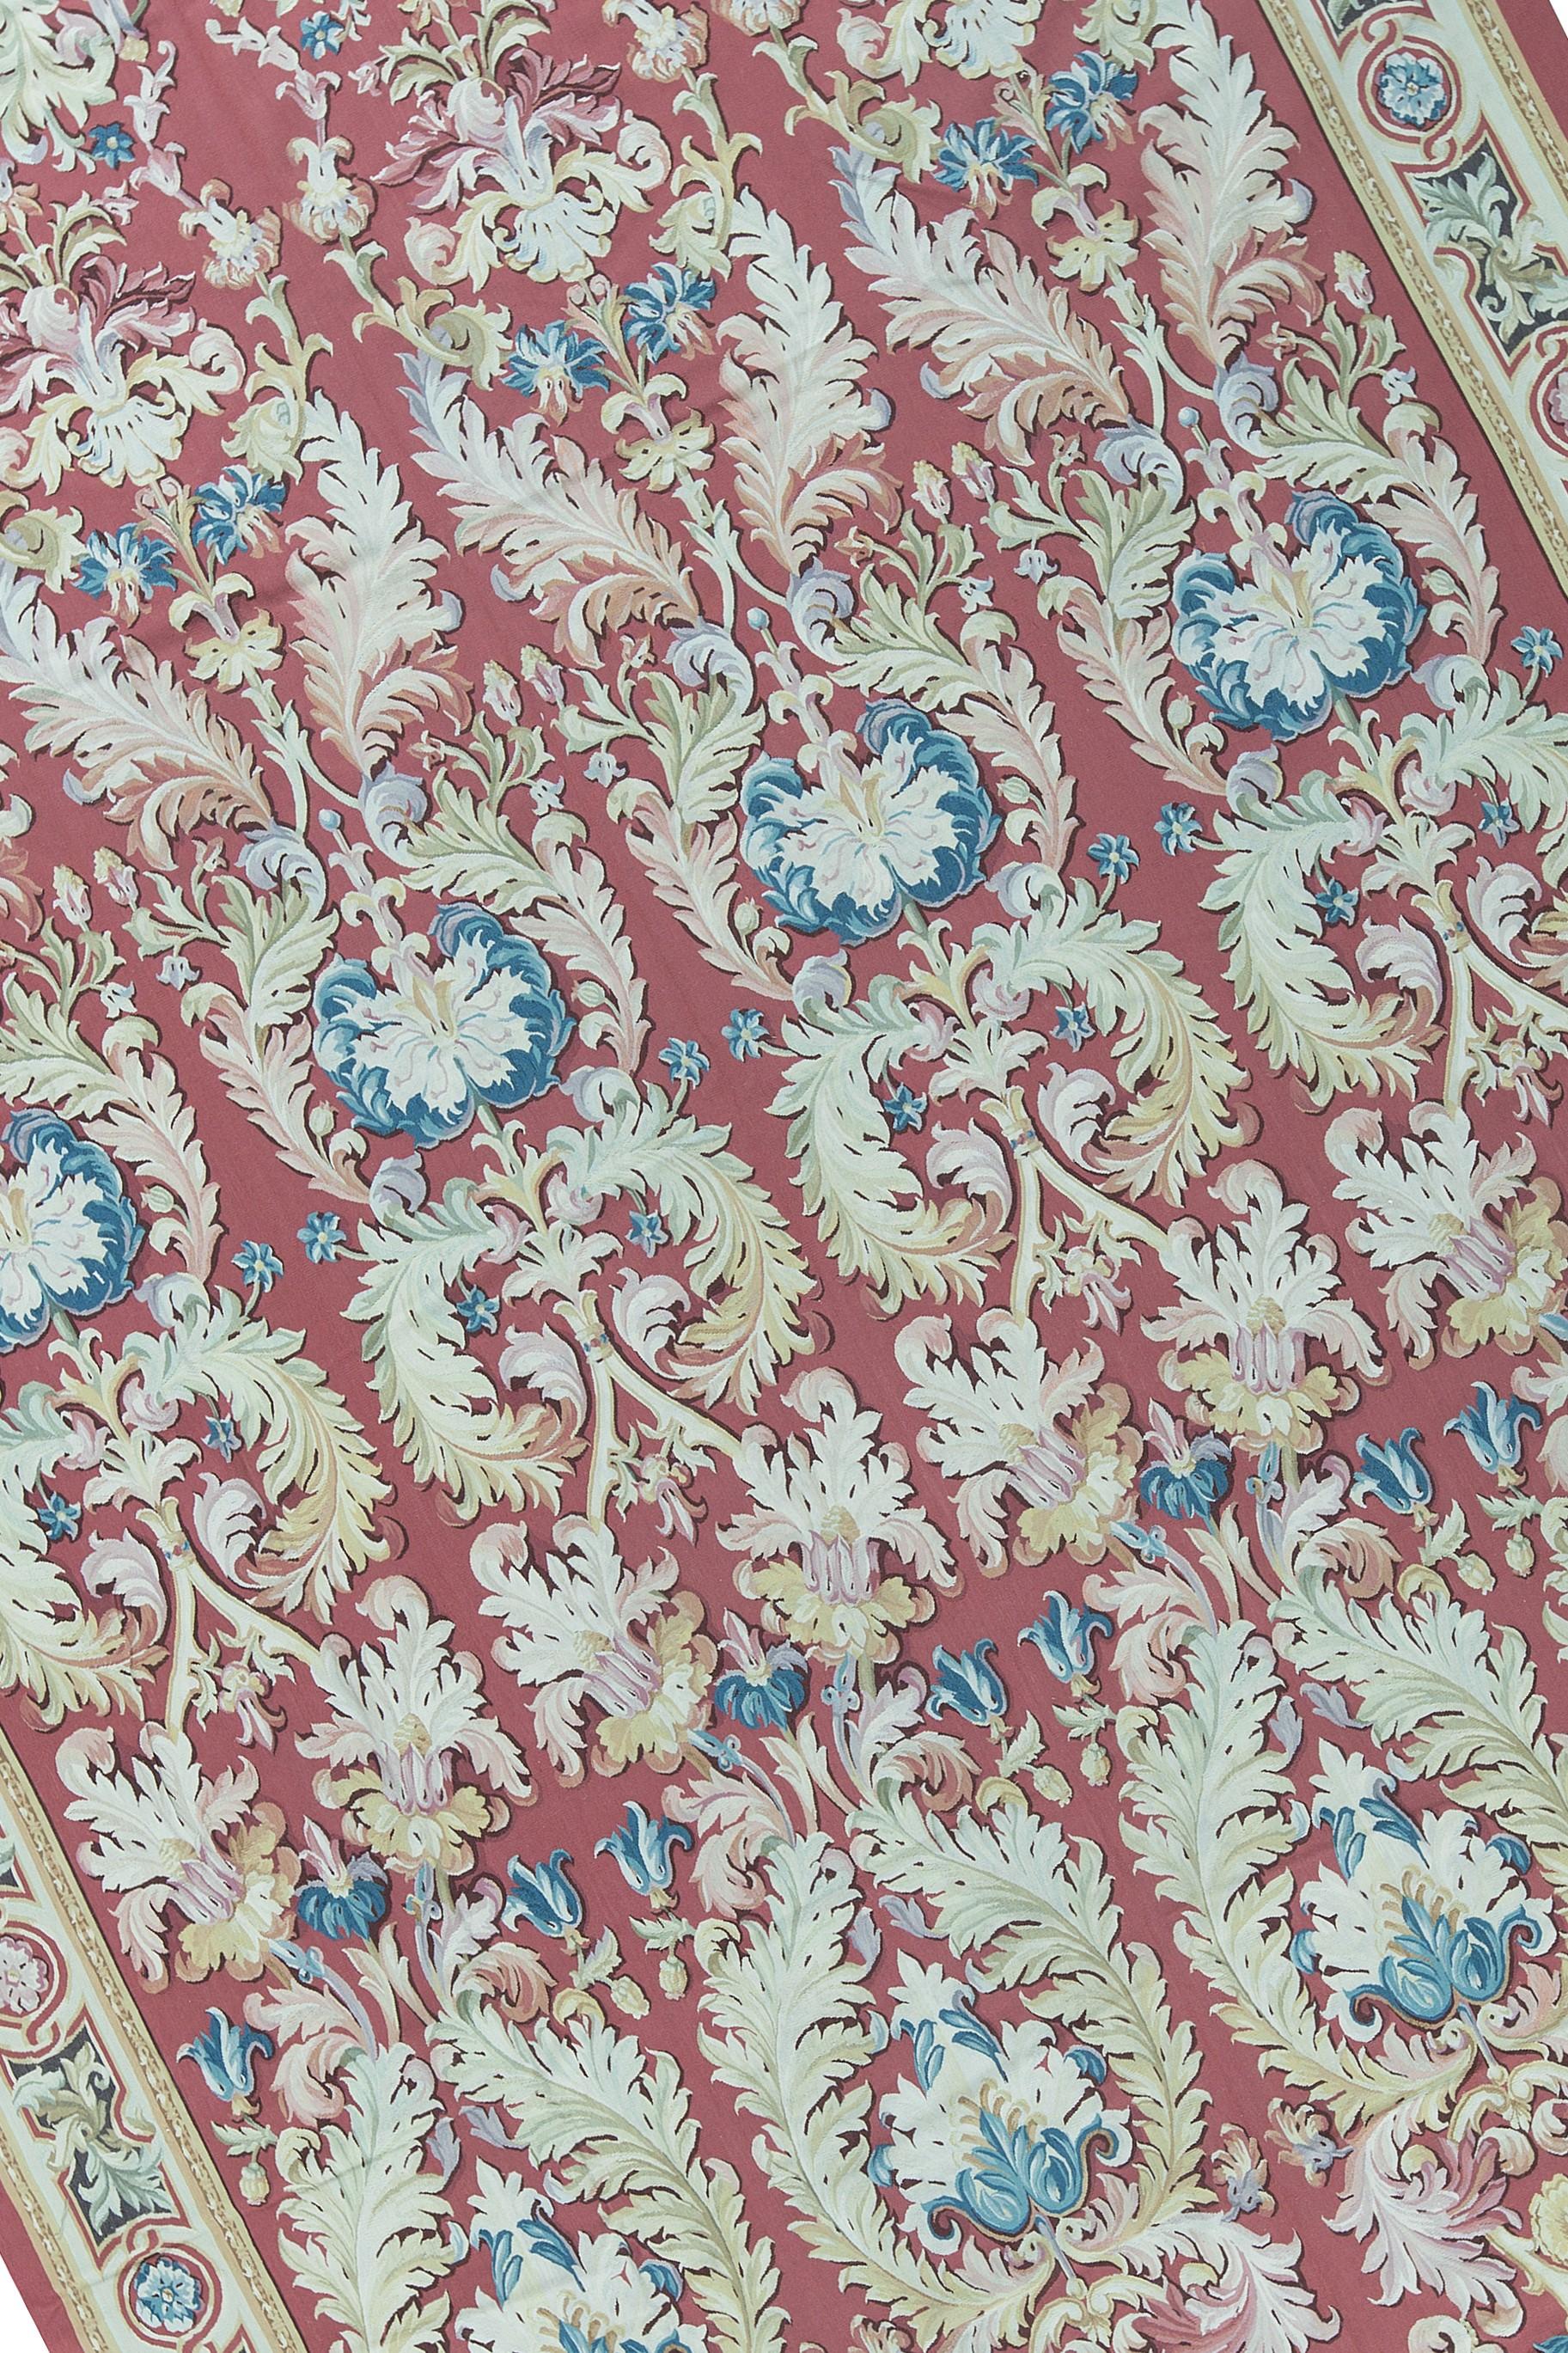 Handwoven Recreation of the Classic French flat-weave Aubusson rugs that have been found in the finest homes and palaces since the late 17th century. Size 11' 2'' x 16' 6''.